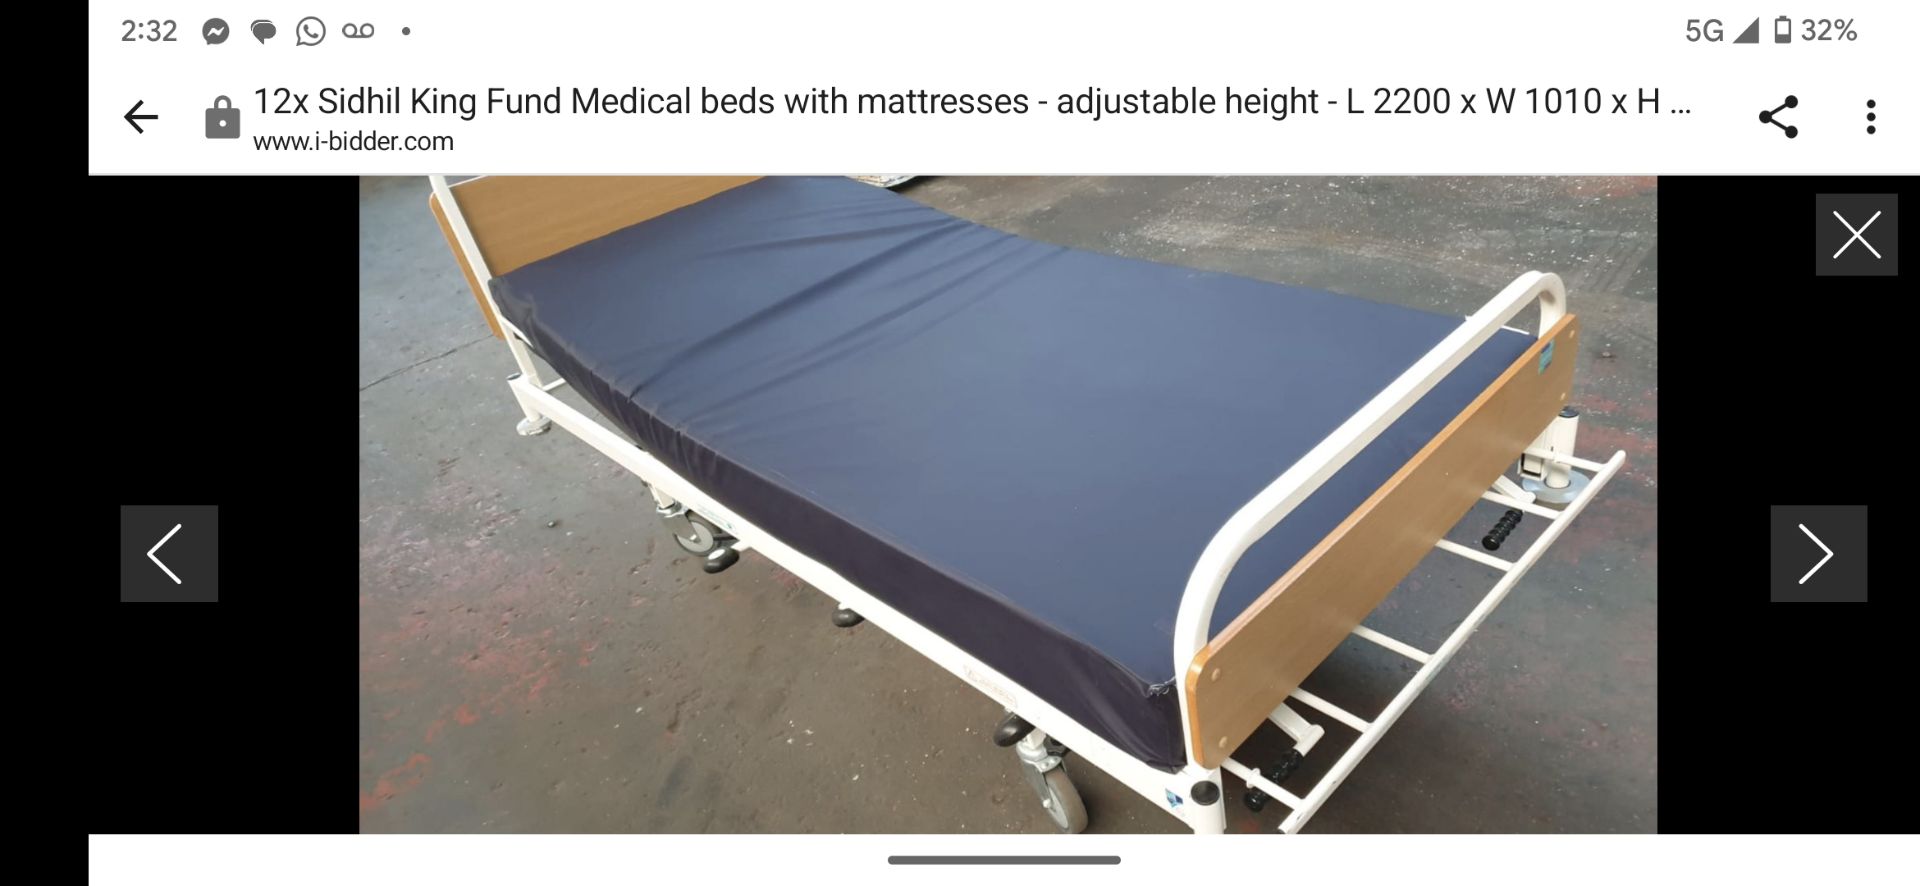 SIDHL 2 WAY TILT, HYDRAULIC LIFT HOSPITAL BED WITH MATTRESS RRP £1685 (NO VAT ON HAMMER) - Image 4 of 7